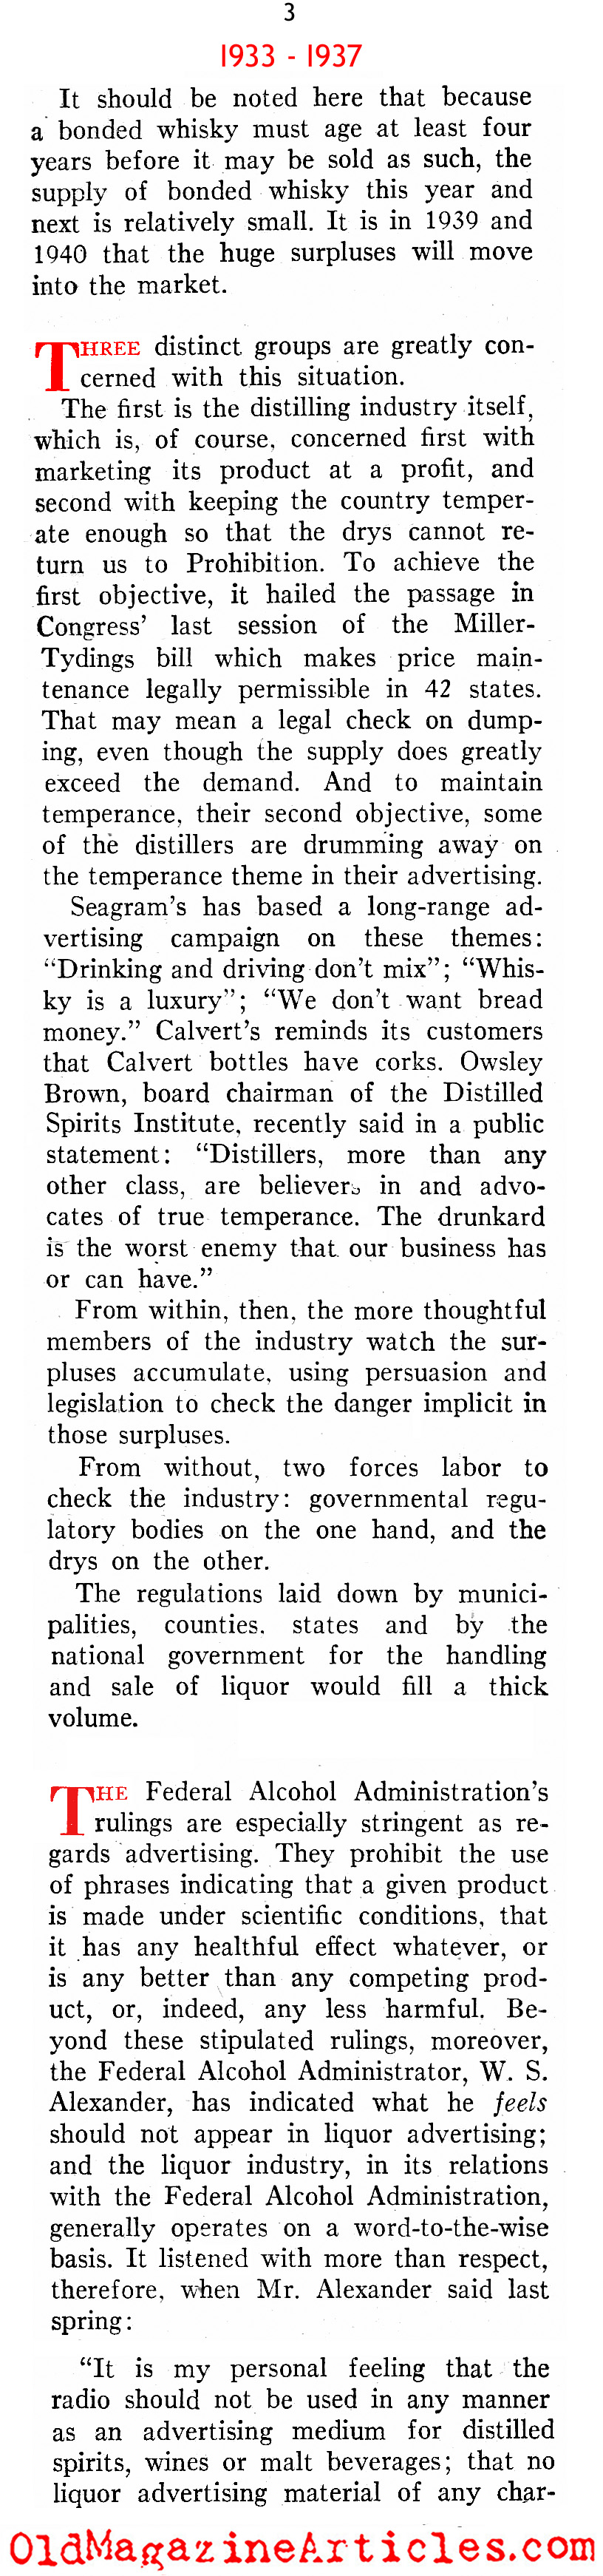 Repeal + Four Years (Literary Digest, 1937)